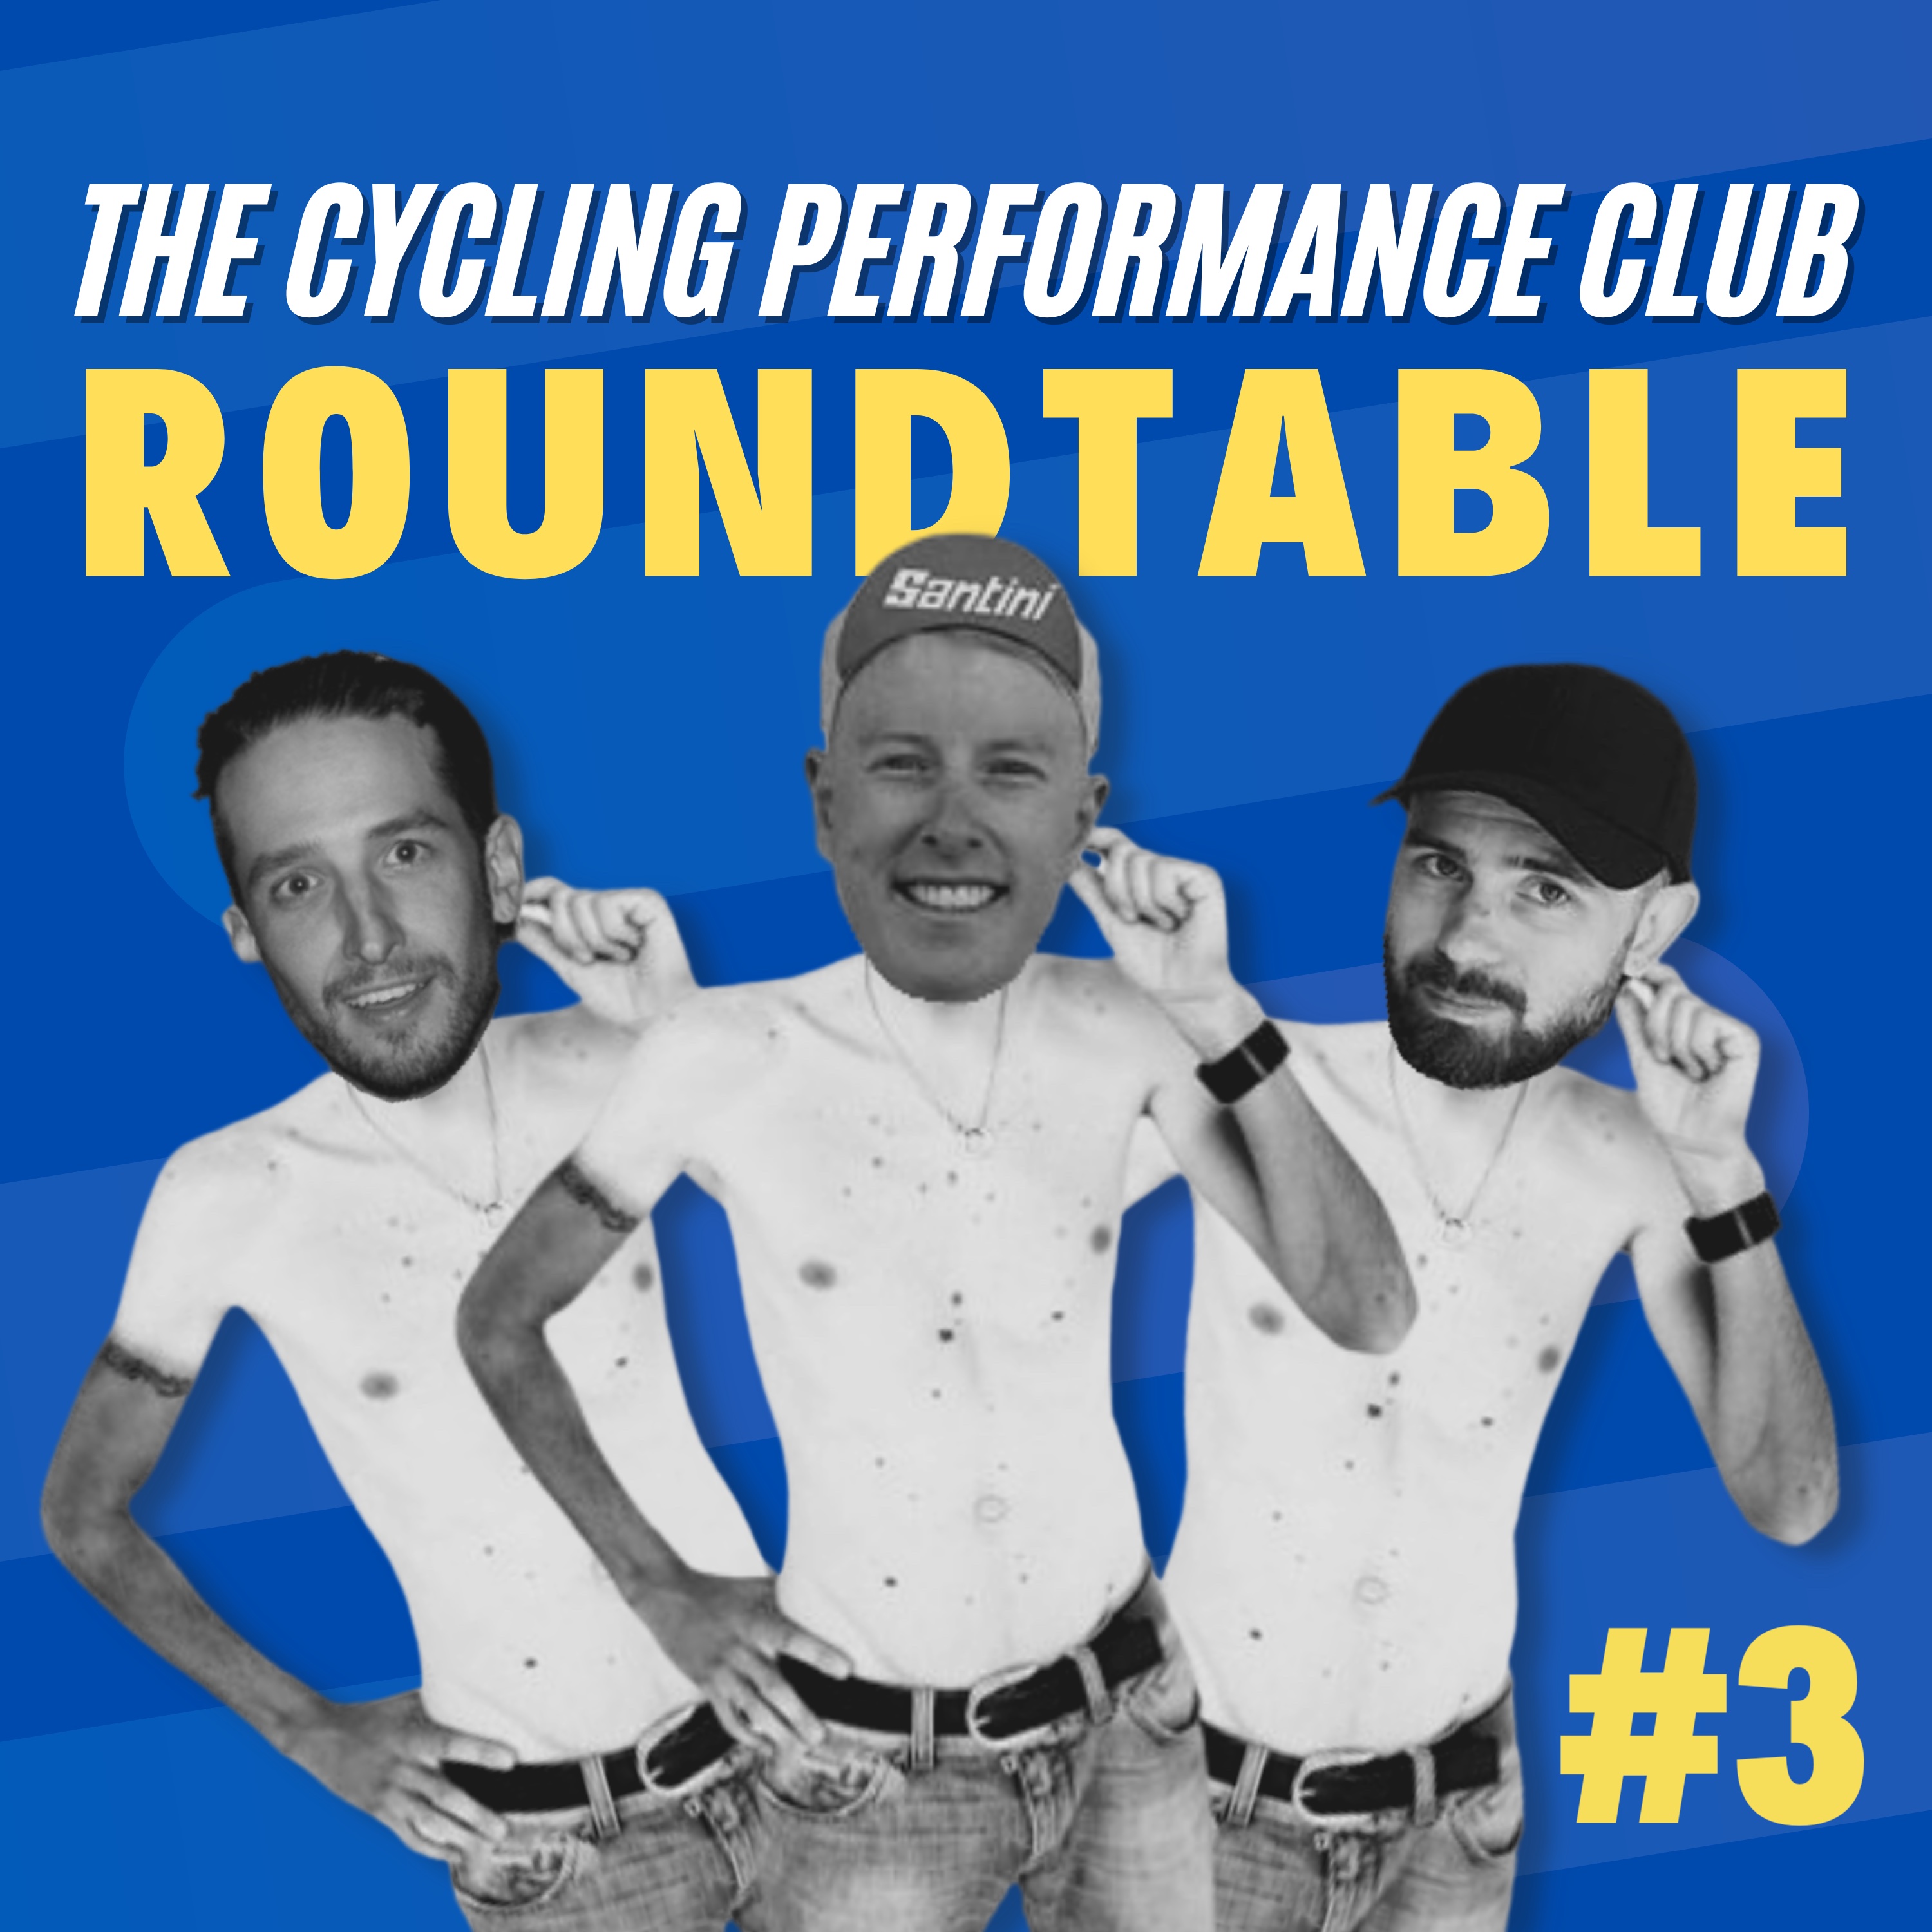 Roundtable #3 - This is a major conflict of interest in cycling performance